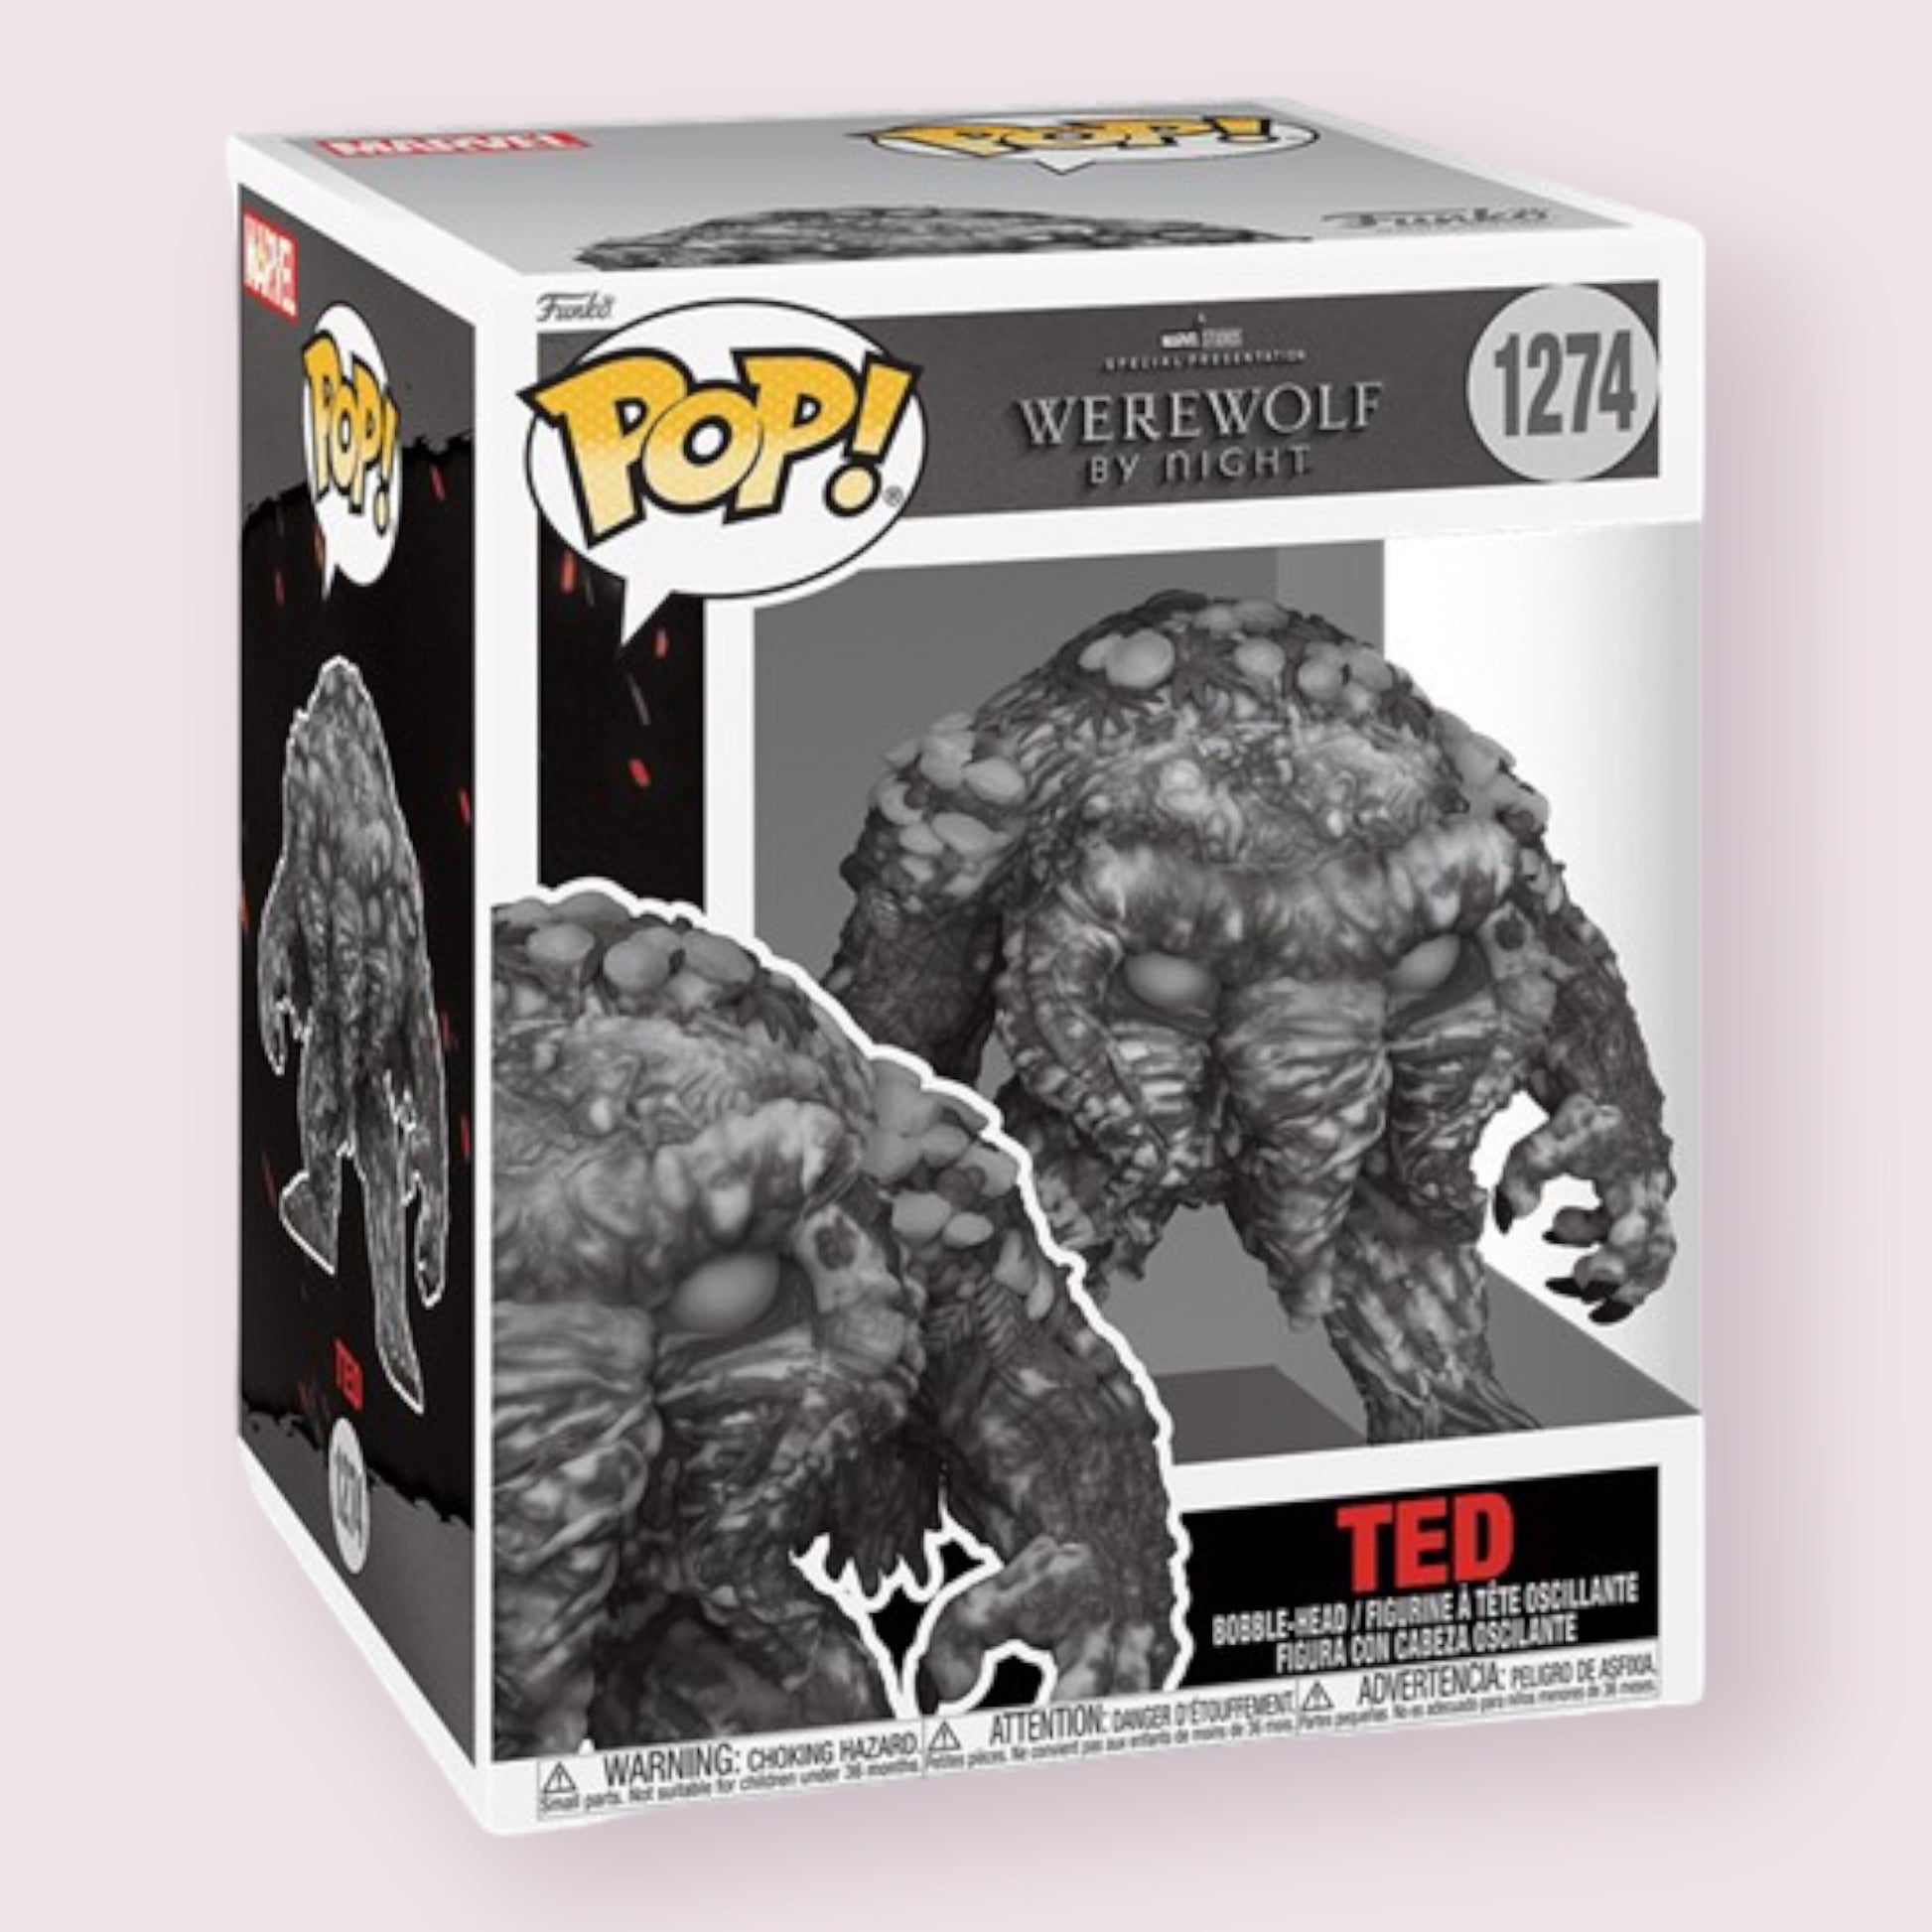 POP! Werewolf by Night Ted  Pixie Candy Shoppe   